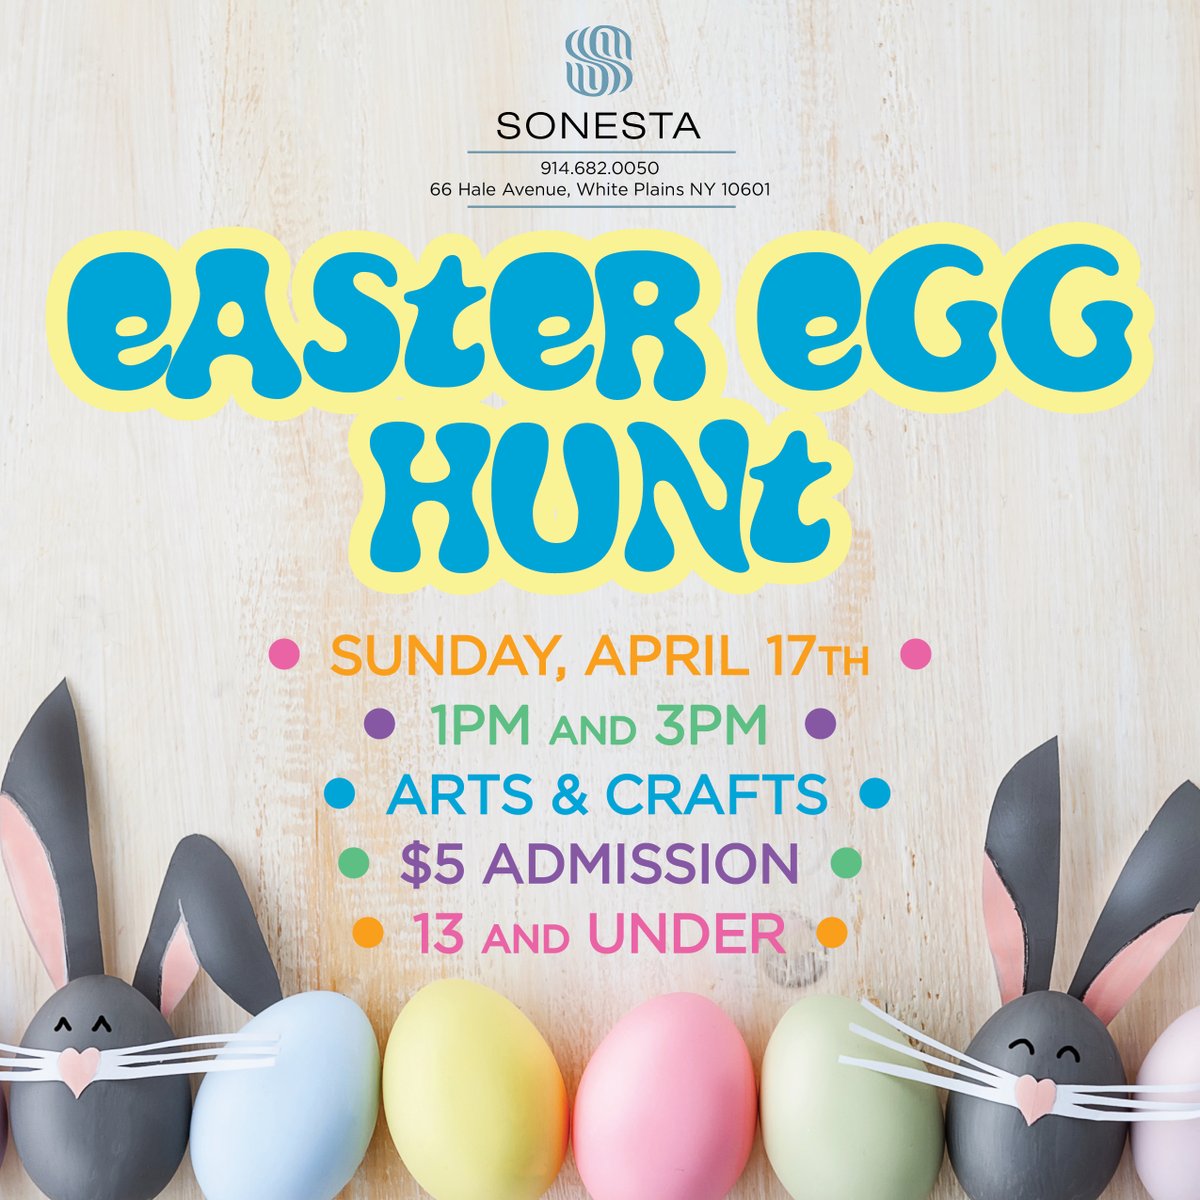 Bring the kiddos for our 🐰EASTER EGG HUNT 🐣#SonestaWhitePlains will host the Hunt at 1pm and 3pm (between our brunch seatings!) FIND THE GOLDEN EGG FOR A GRAND PRIZE! We'll also have arts + crafts for the little ones. #Easter #EasterBrunch #SonestaHotel #ShineThroughSonesta